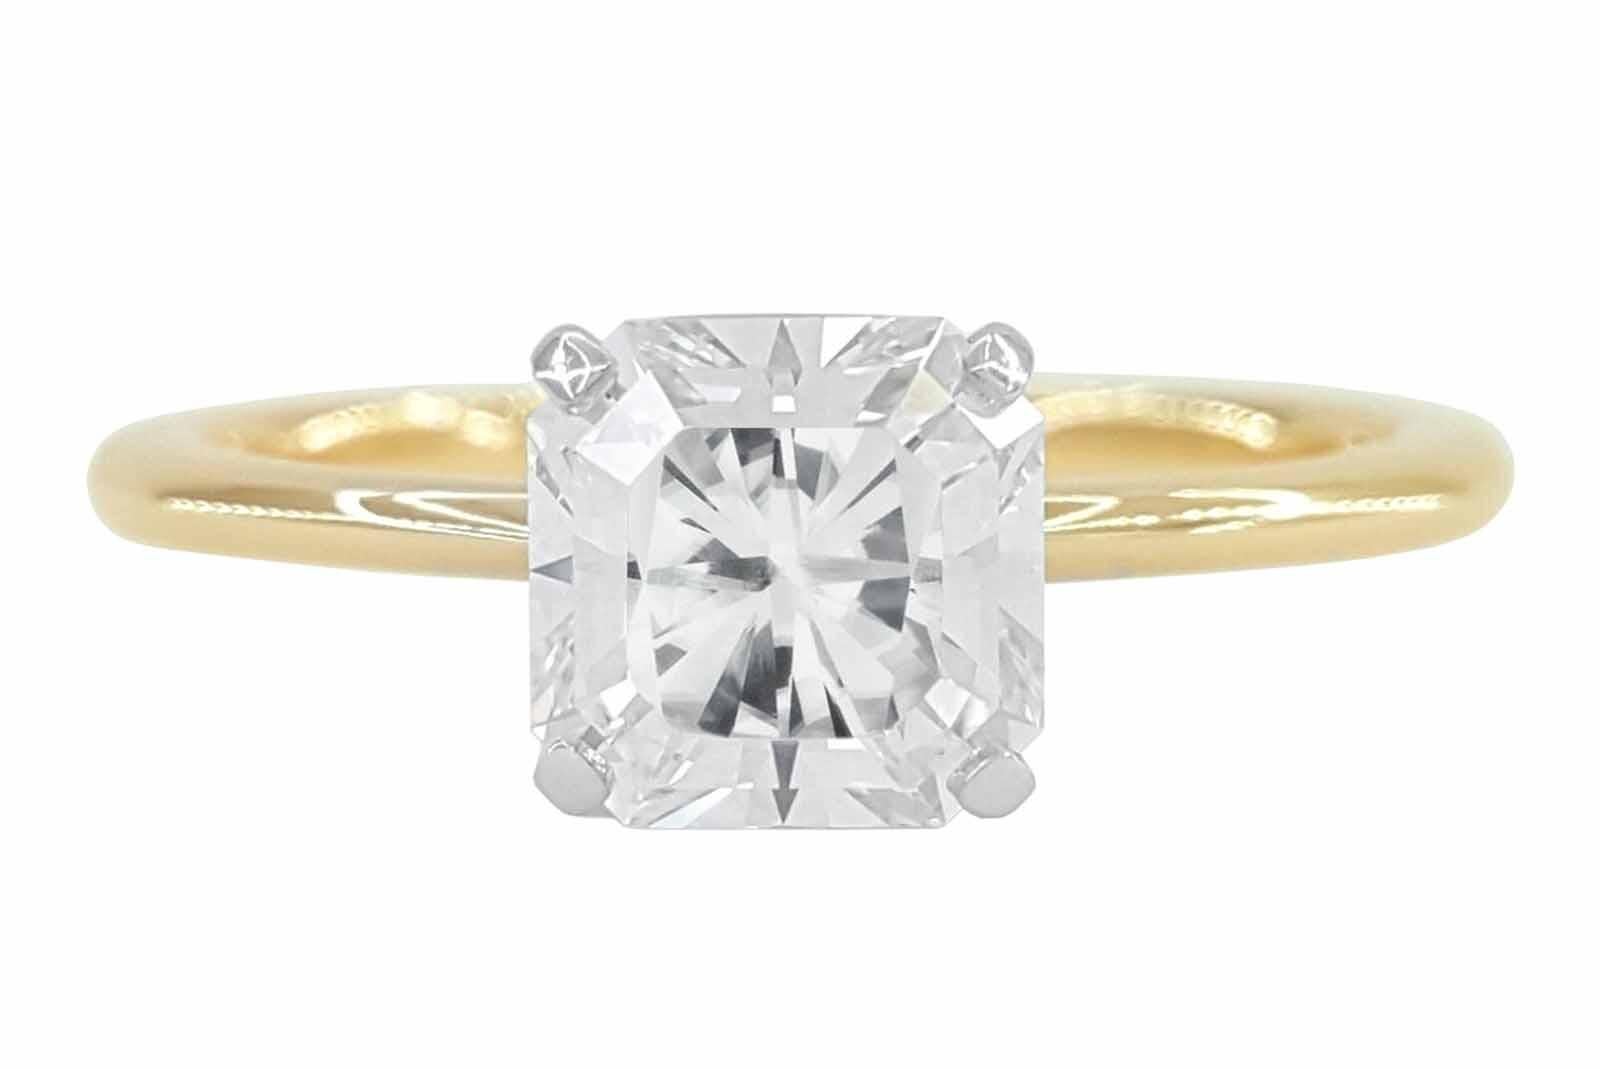 This stunning piece showcases a radiant 1 carat diamond set in a classic 18 k yellow gold solitaire setting. The diamond, boasting an impressive F color grade, embodies near-colorless perfection, emitting a captivating brilliance that catches the